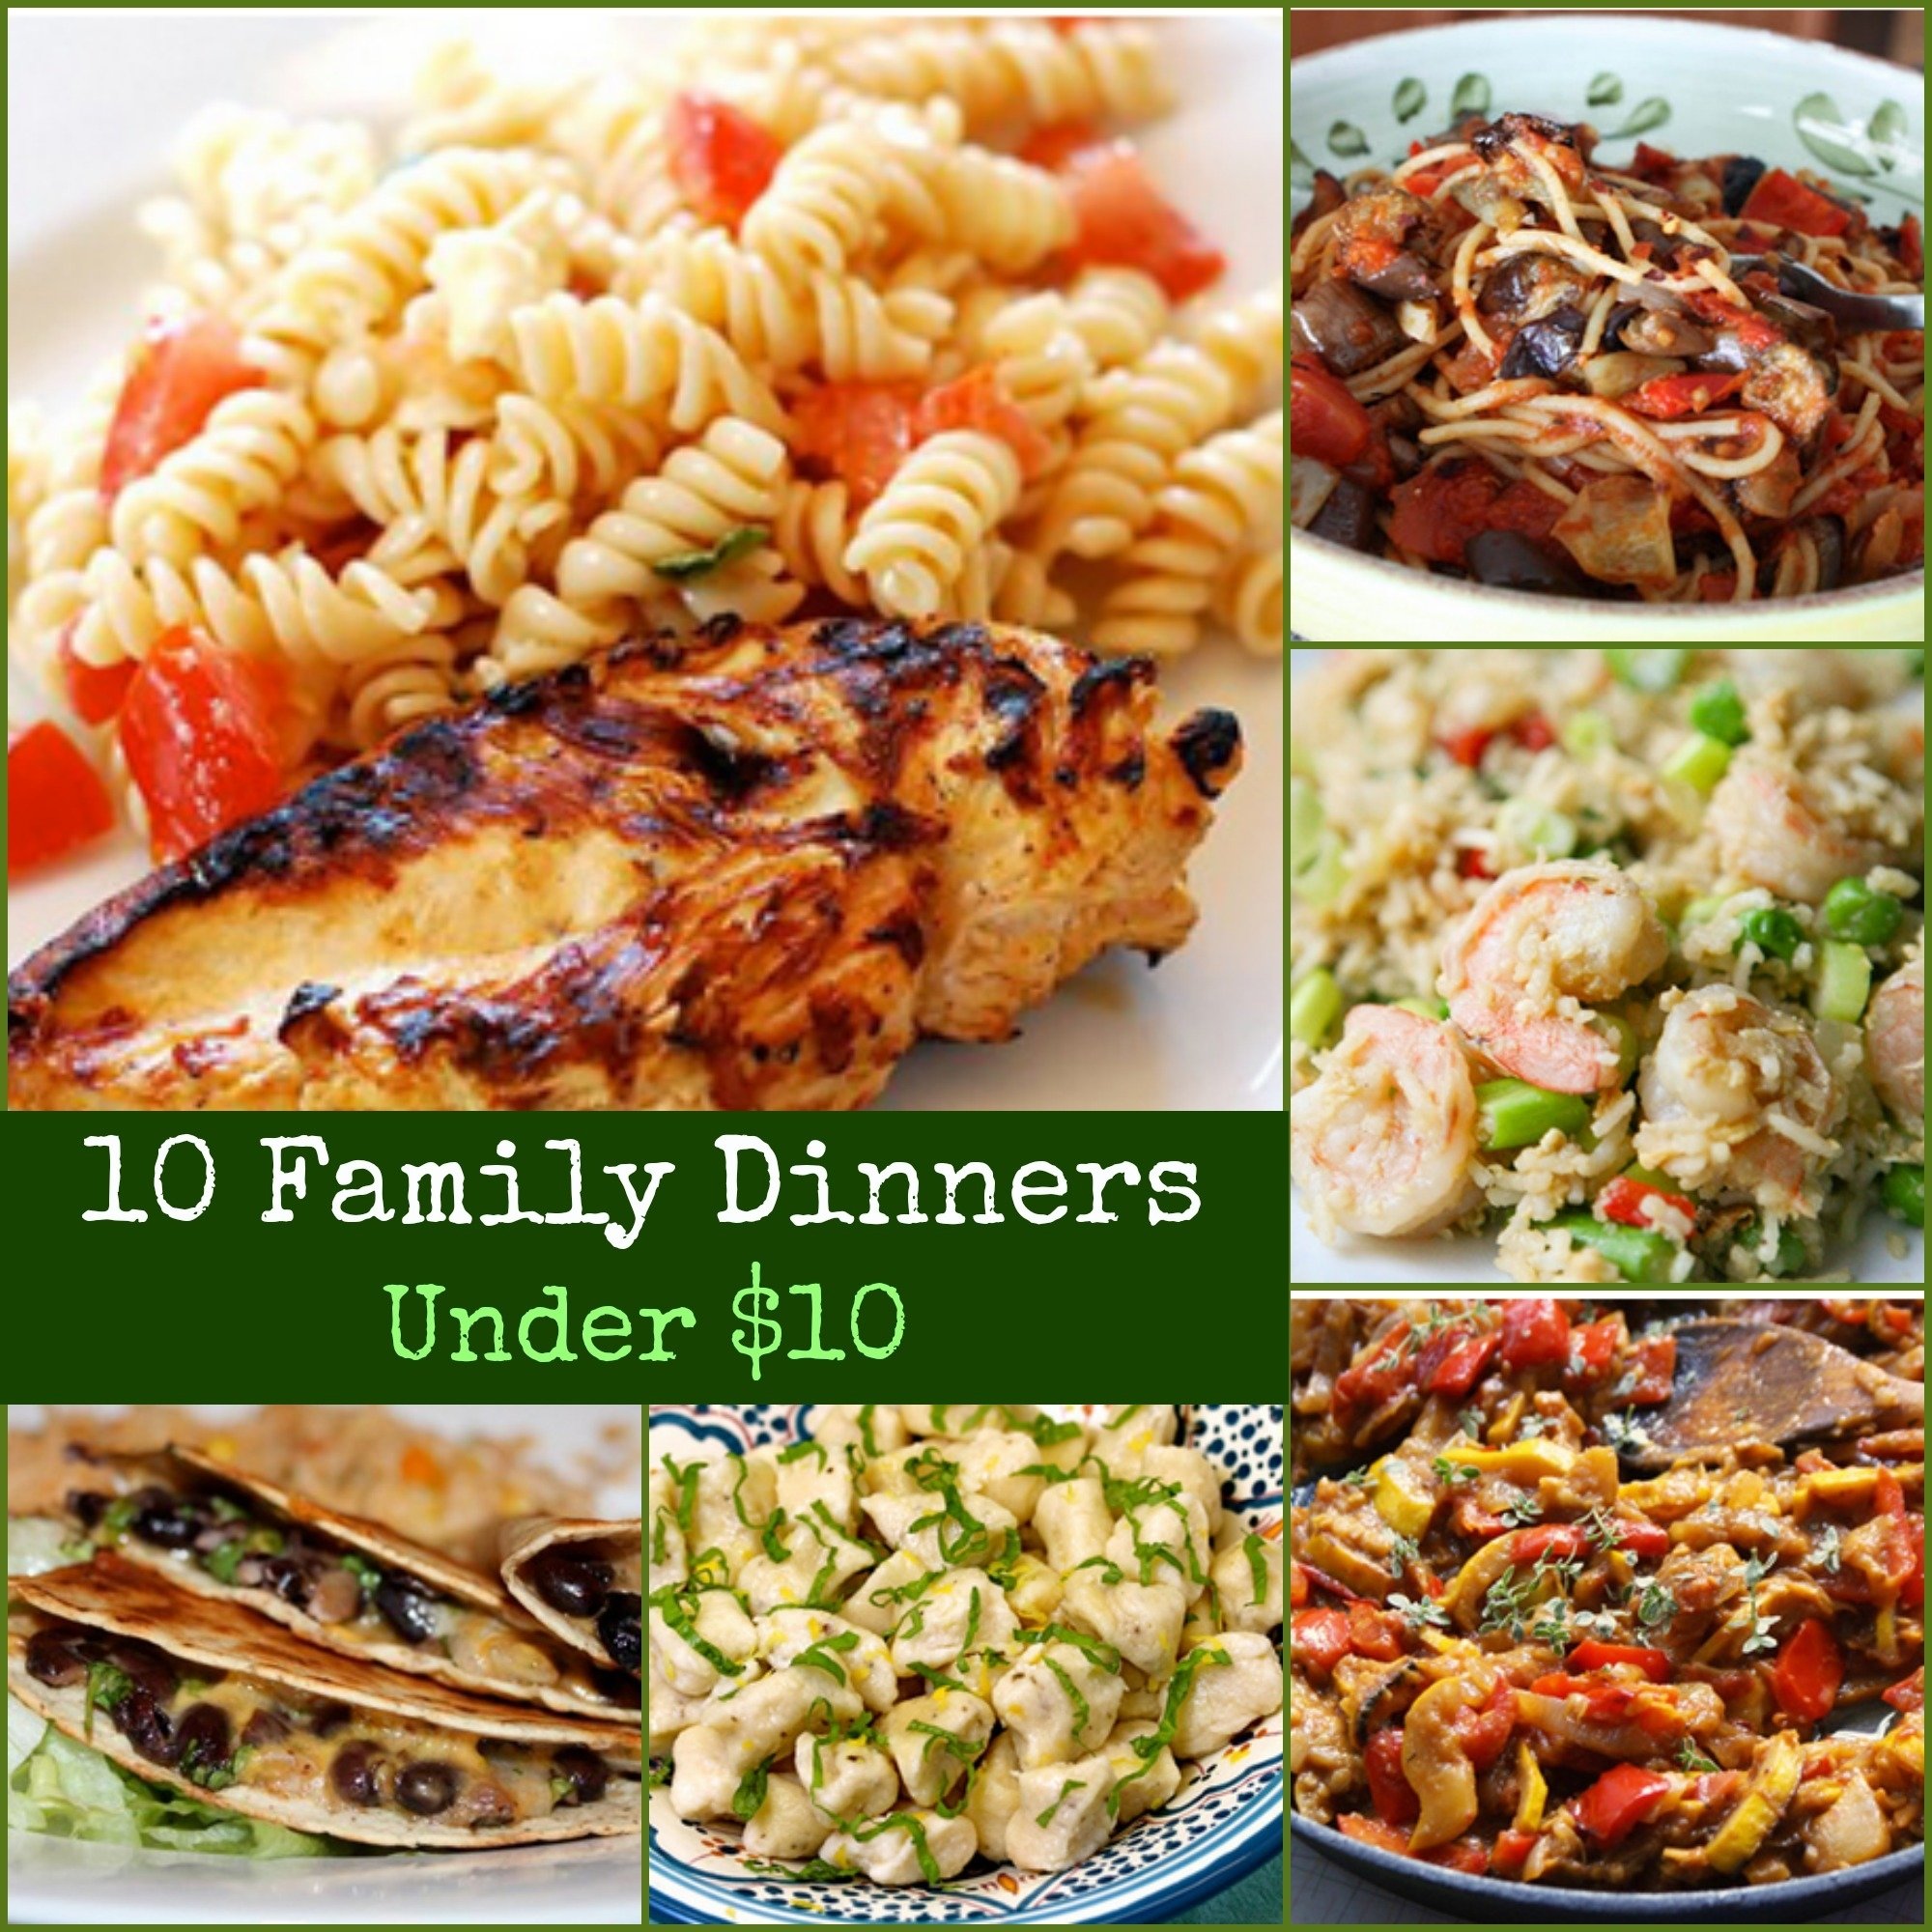 15 Great Cheap Easy Dinners For Two – Easy Recipes To Make At Home